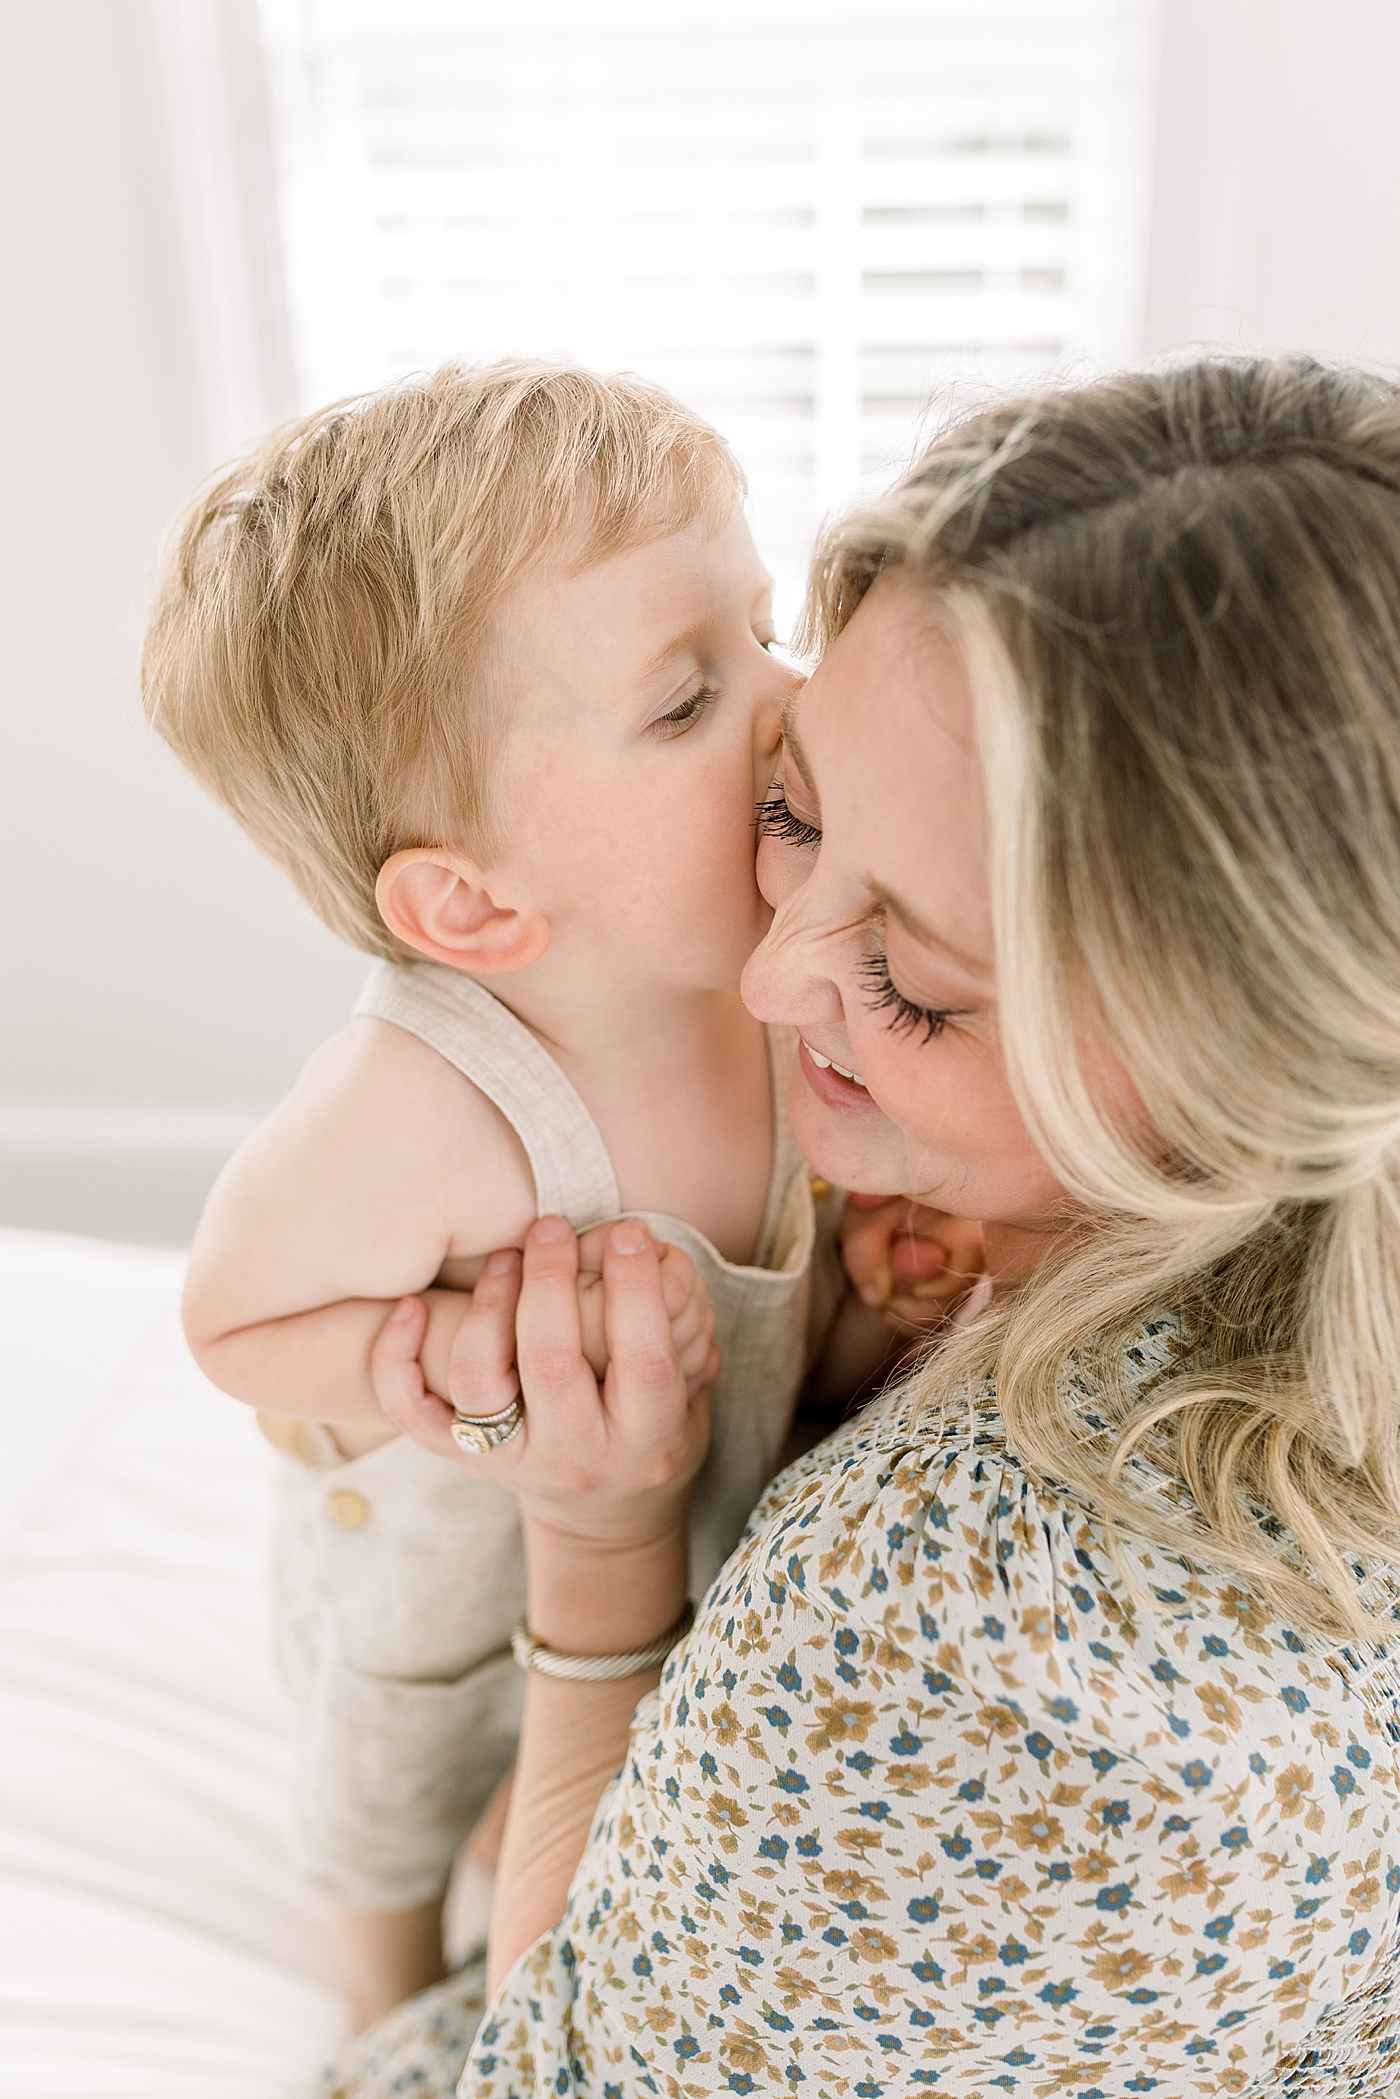 Close up of a little boy kissing his mother on the cheek while she's smiling in a brightly lit bedroom | Image by Caitlyn Motycka 